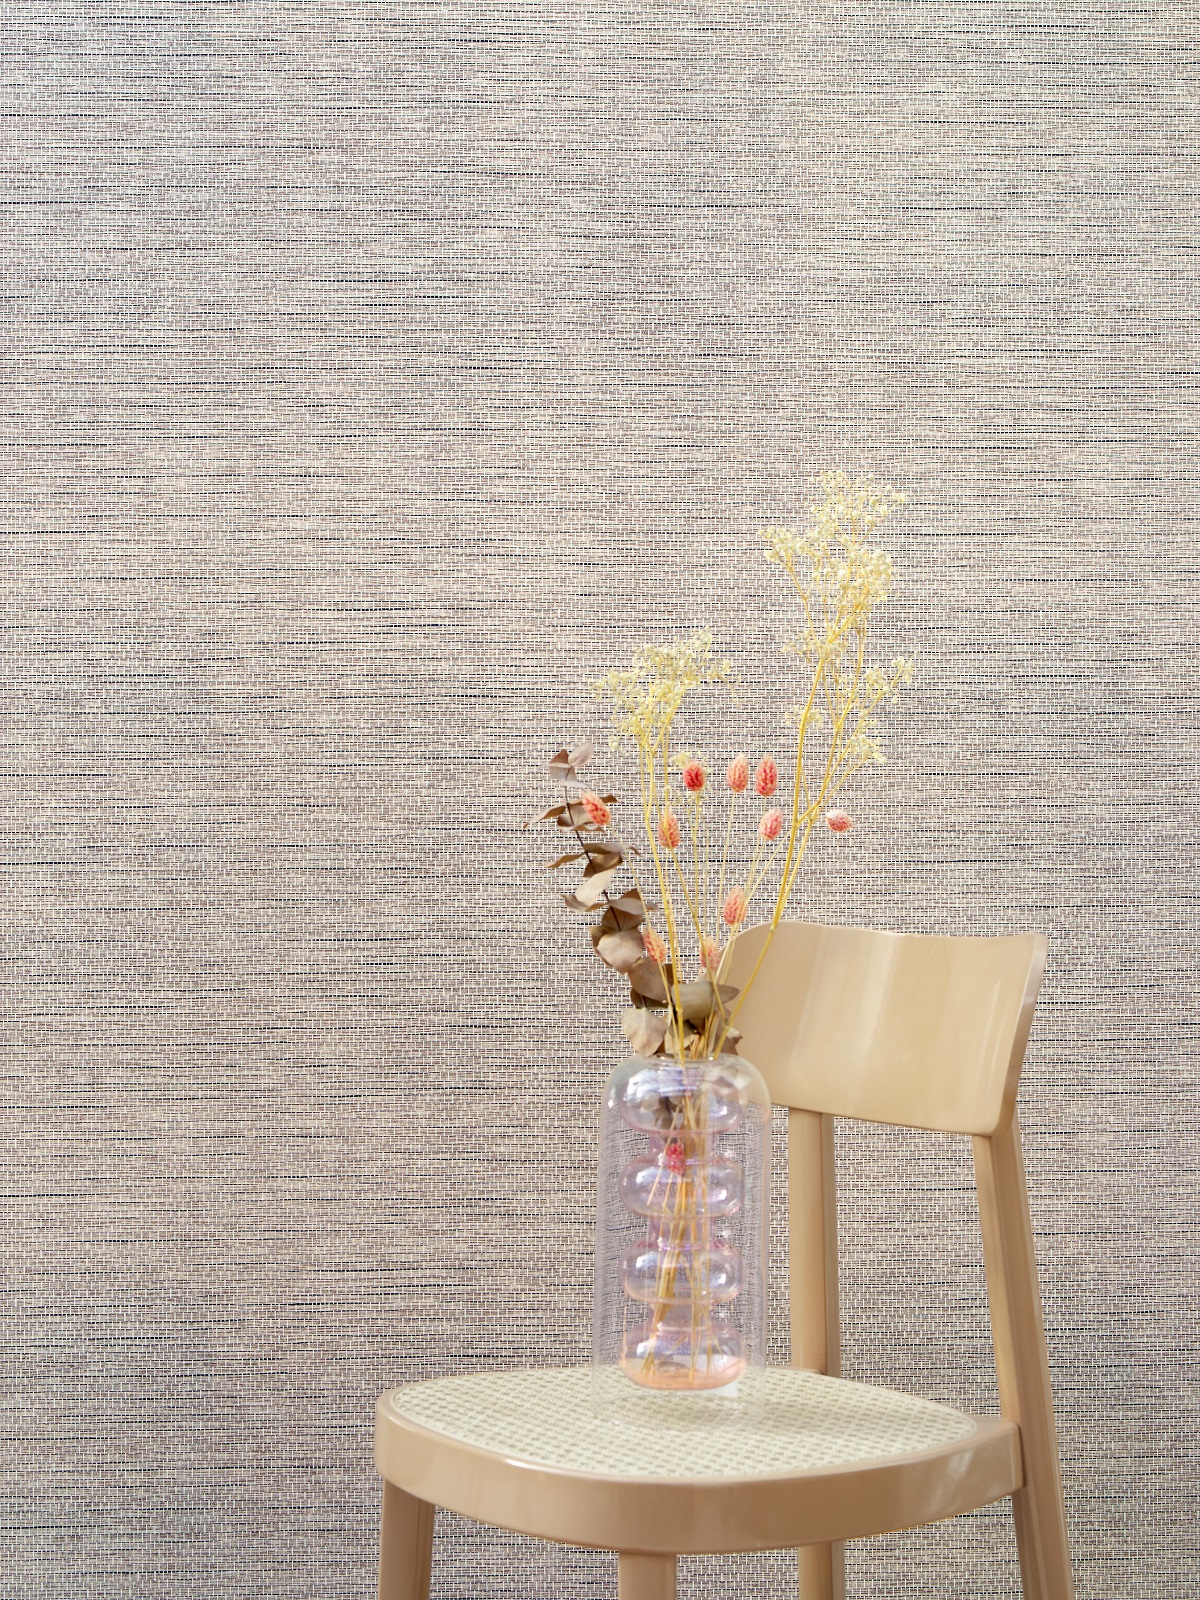 single wooden chair with dried flowers in front of textured woven wall covering